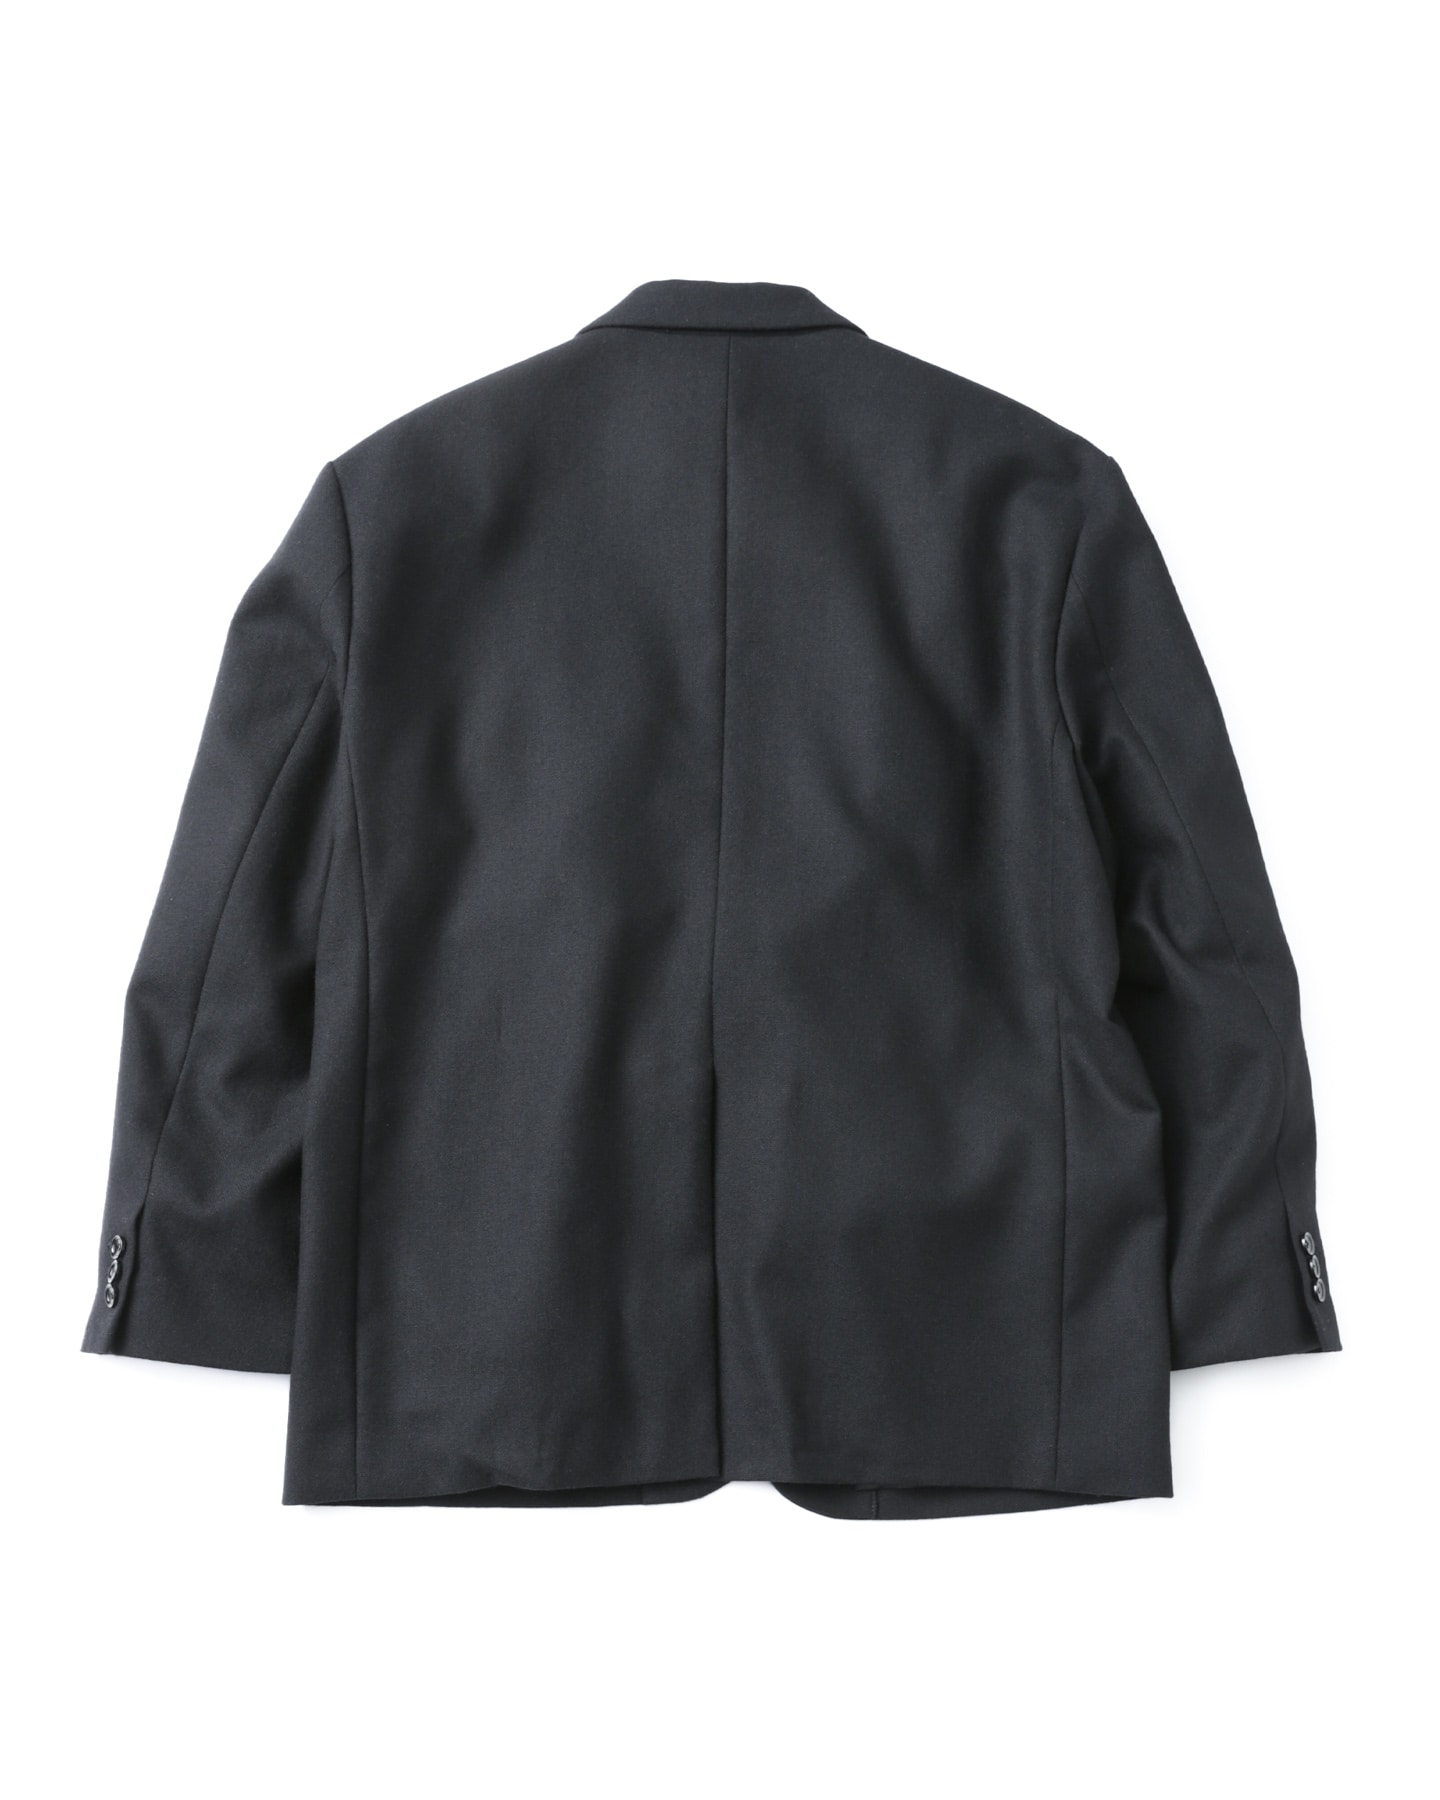 BLENDED WOOL CLASSIC 2BUTTON JACKET(XL BLACK) - SOPH.